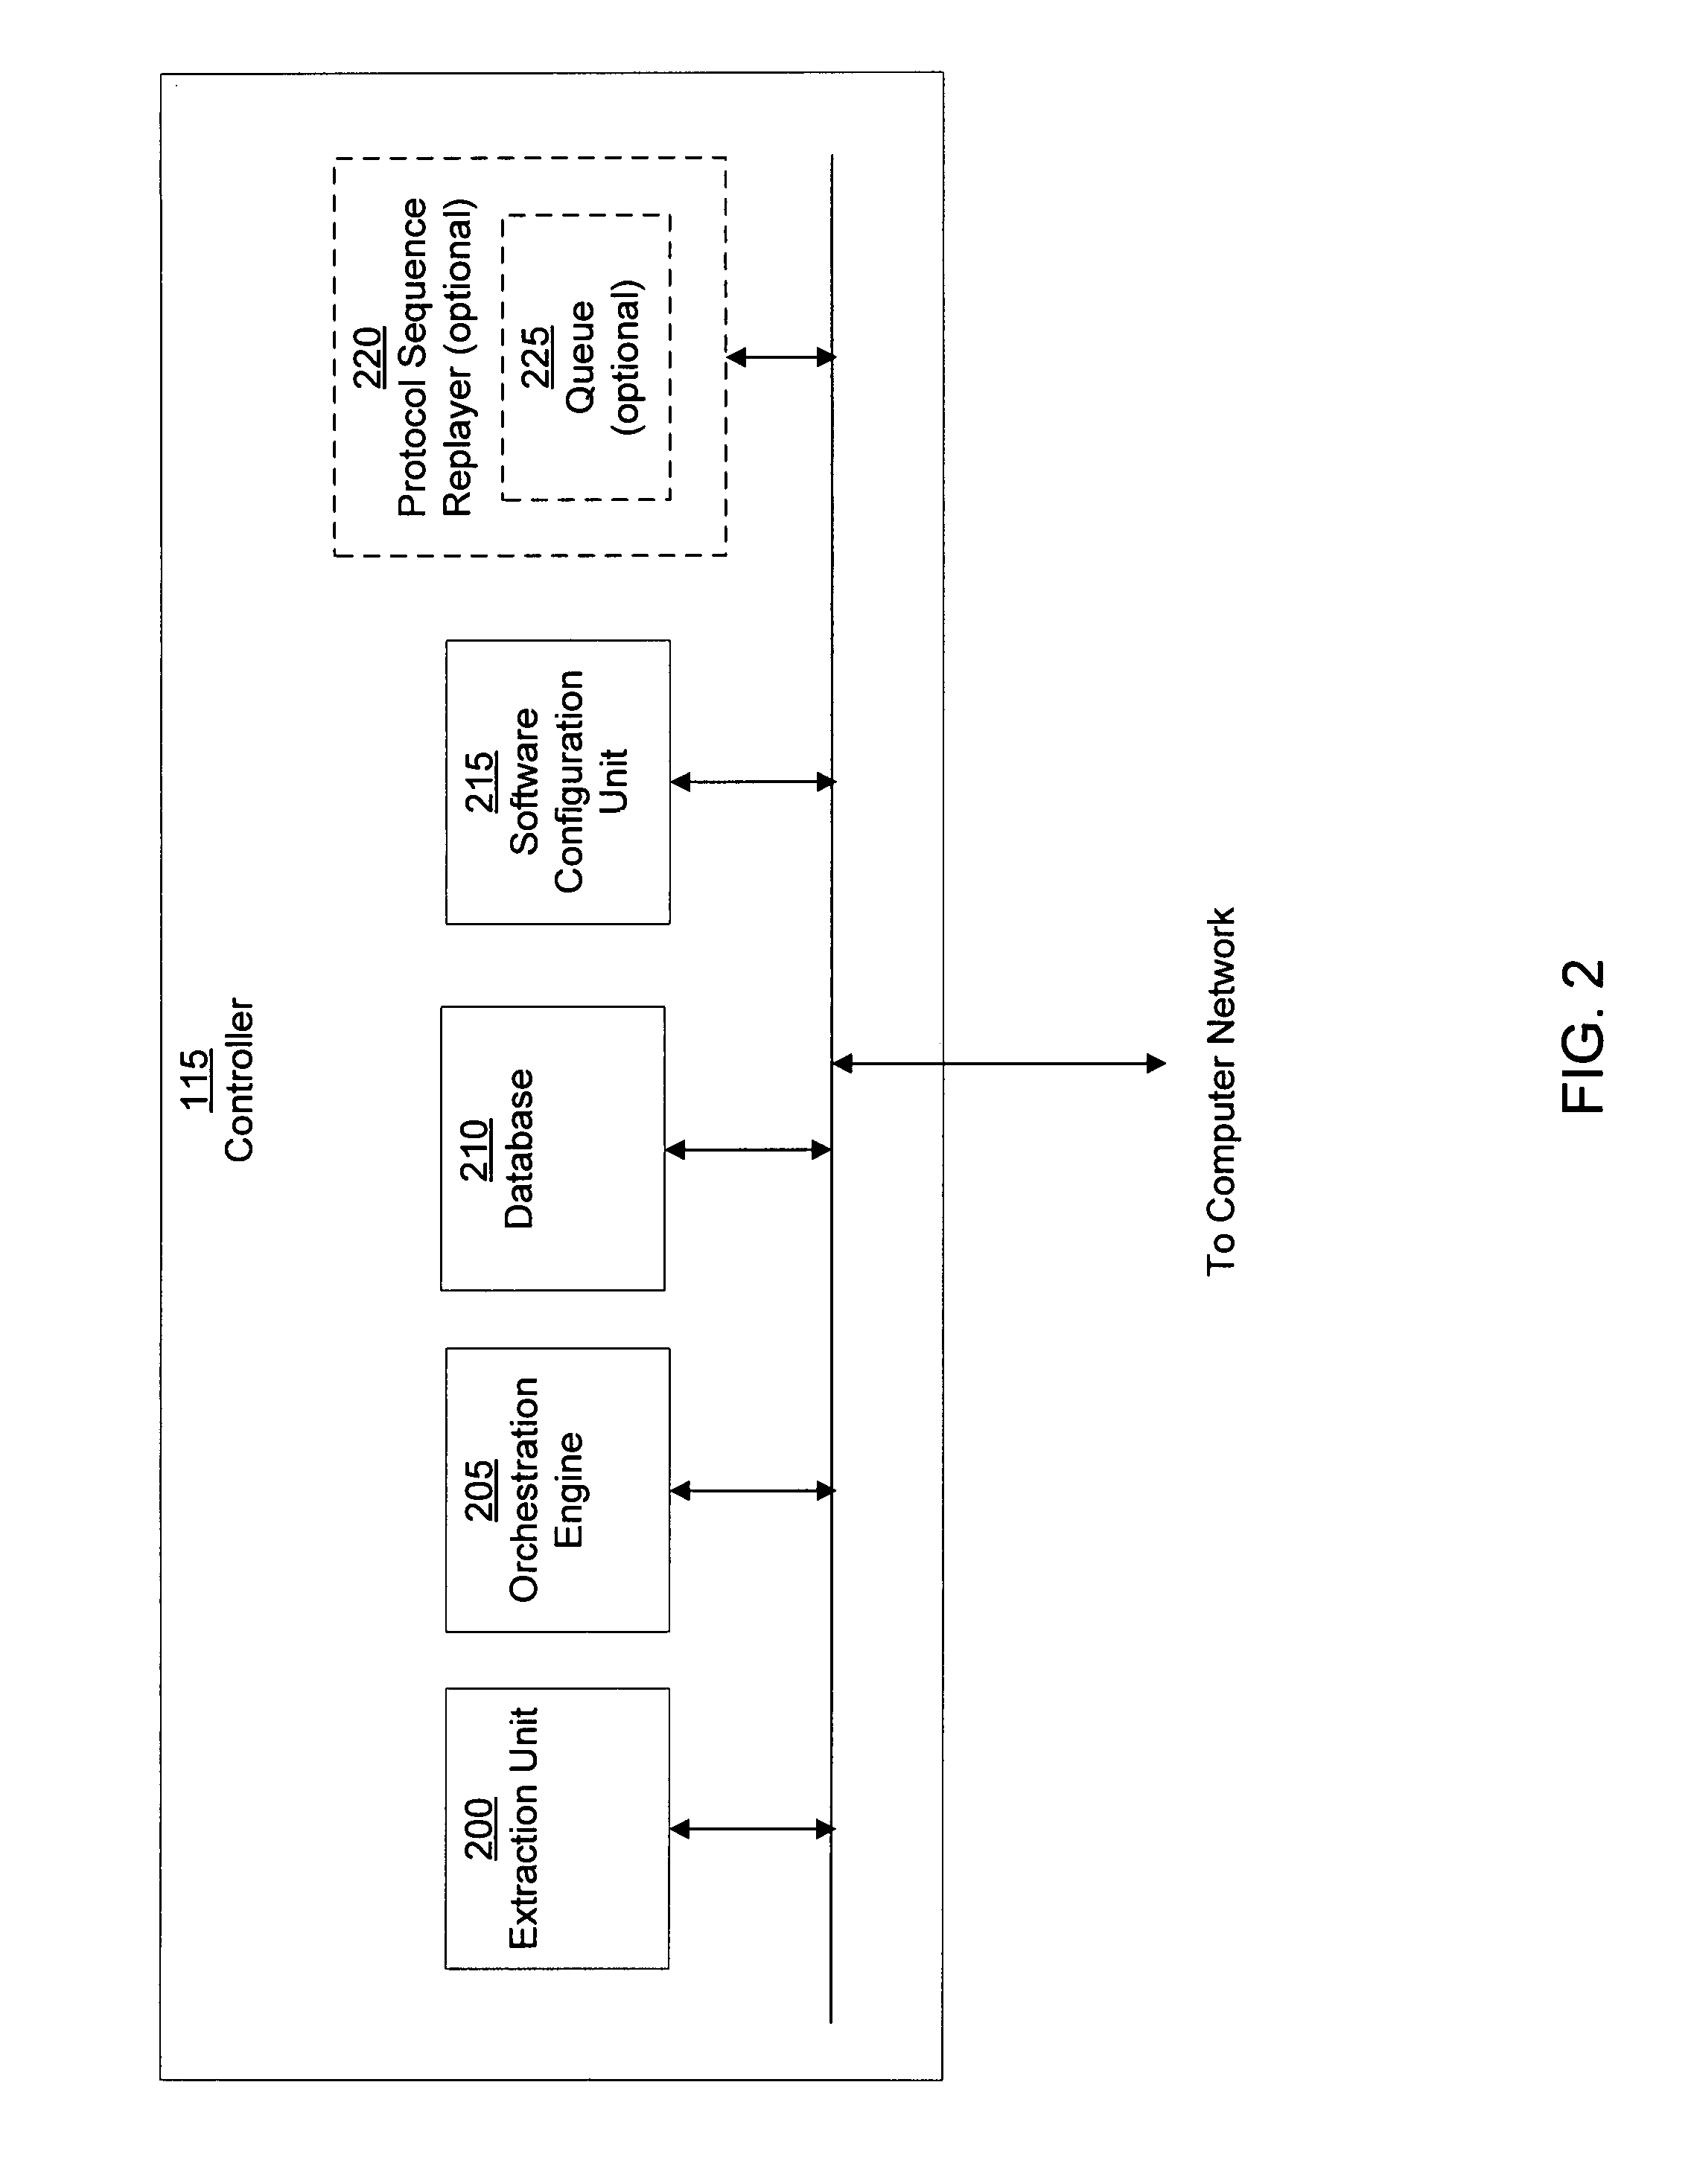 Systems and methods for malware attack detection and identification